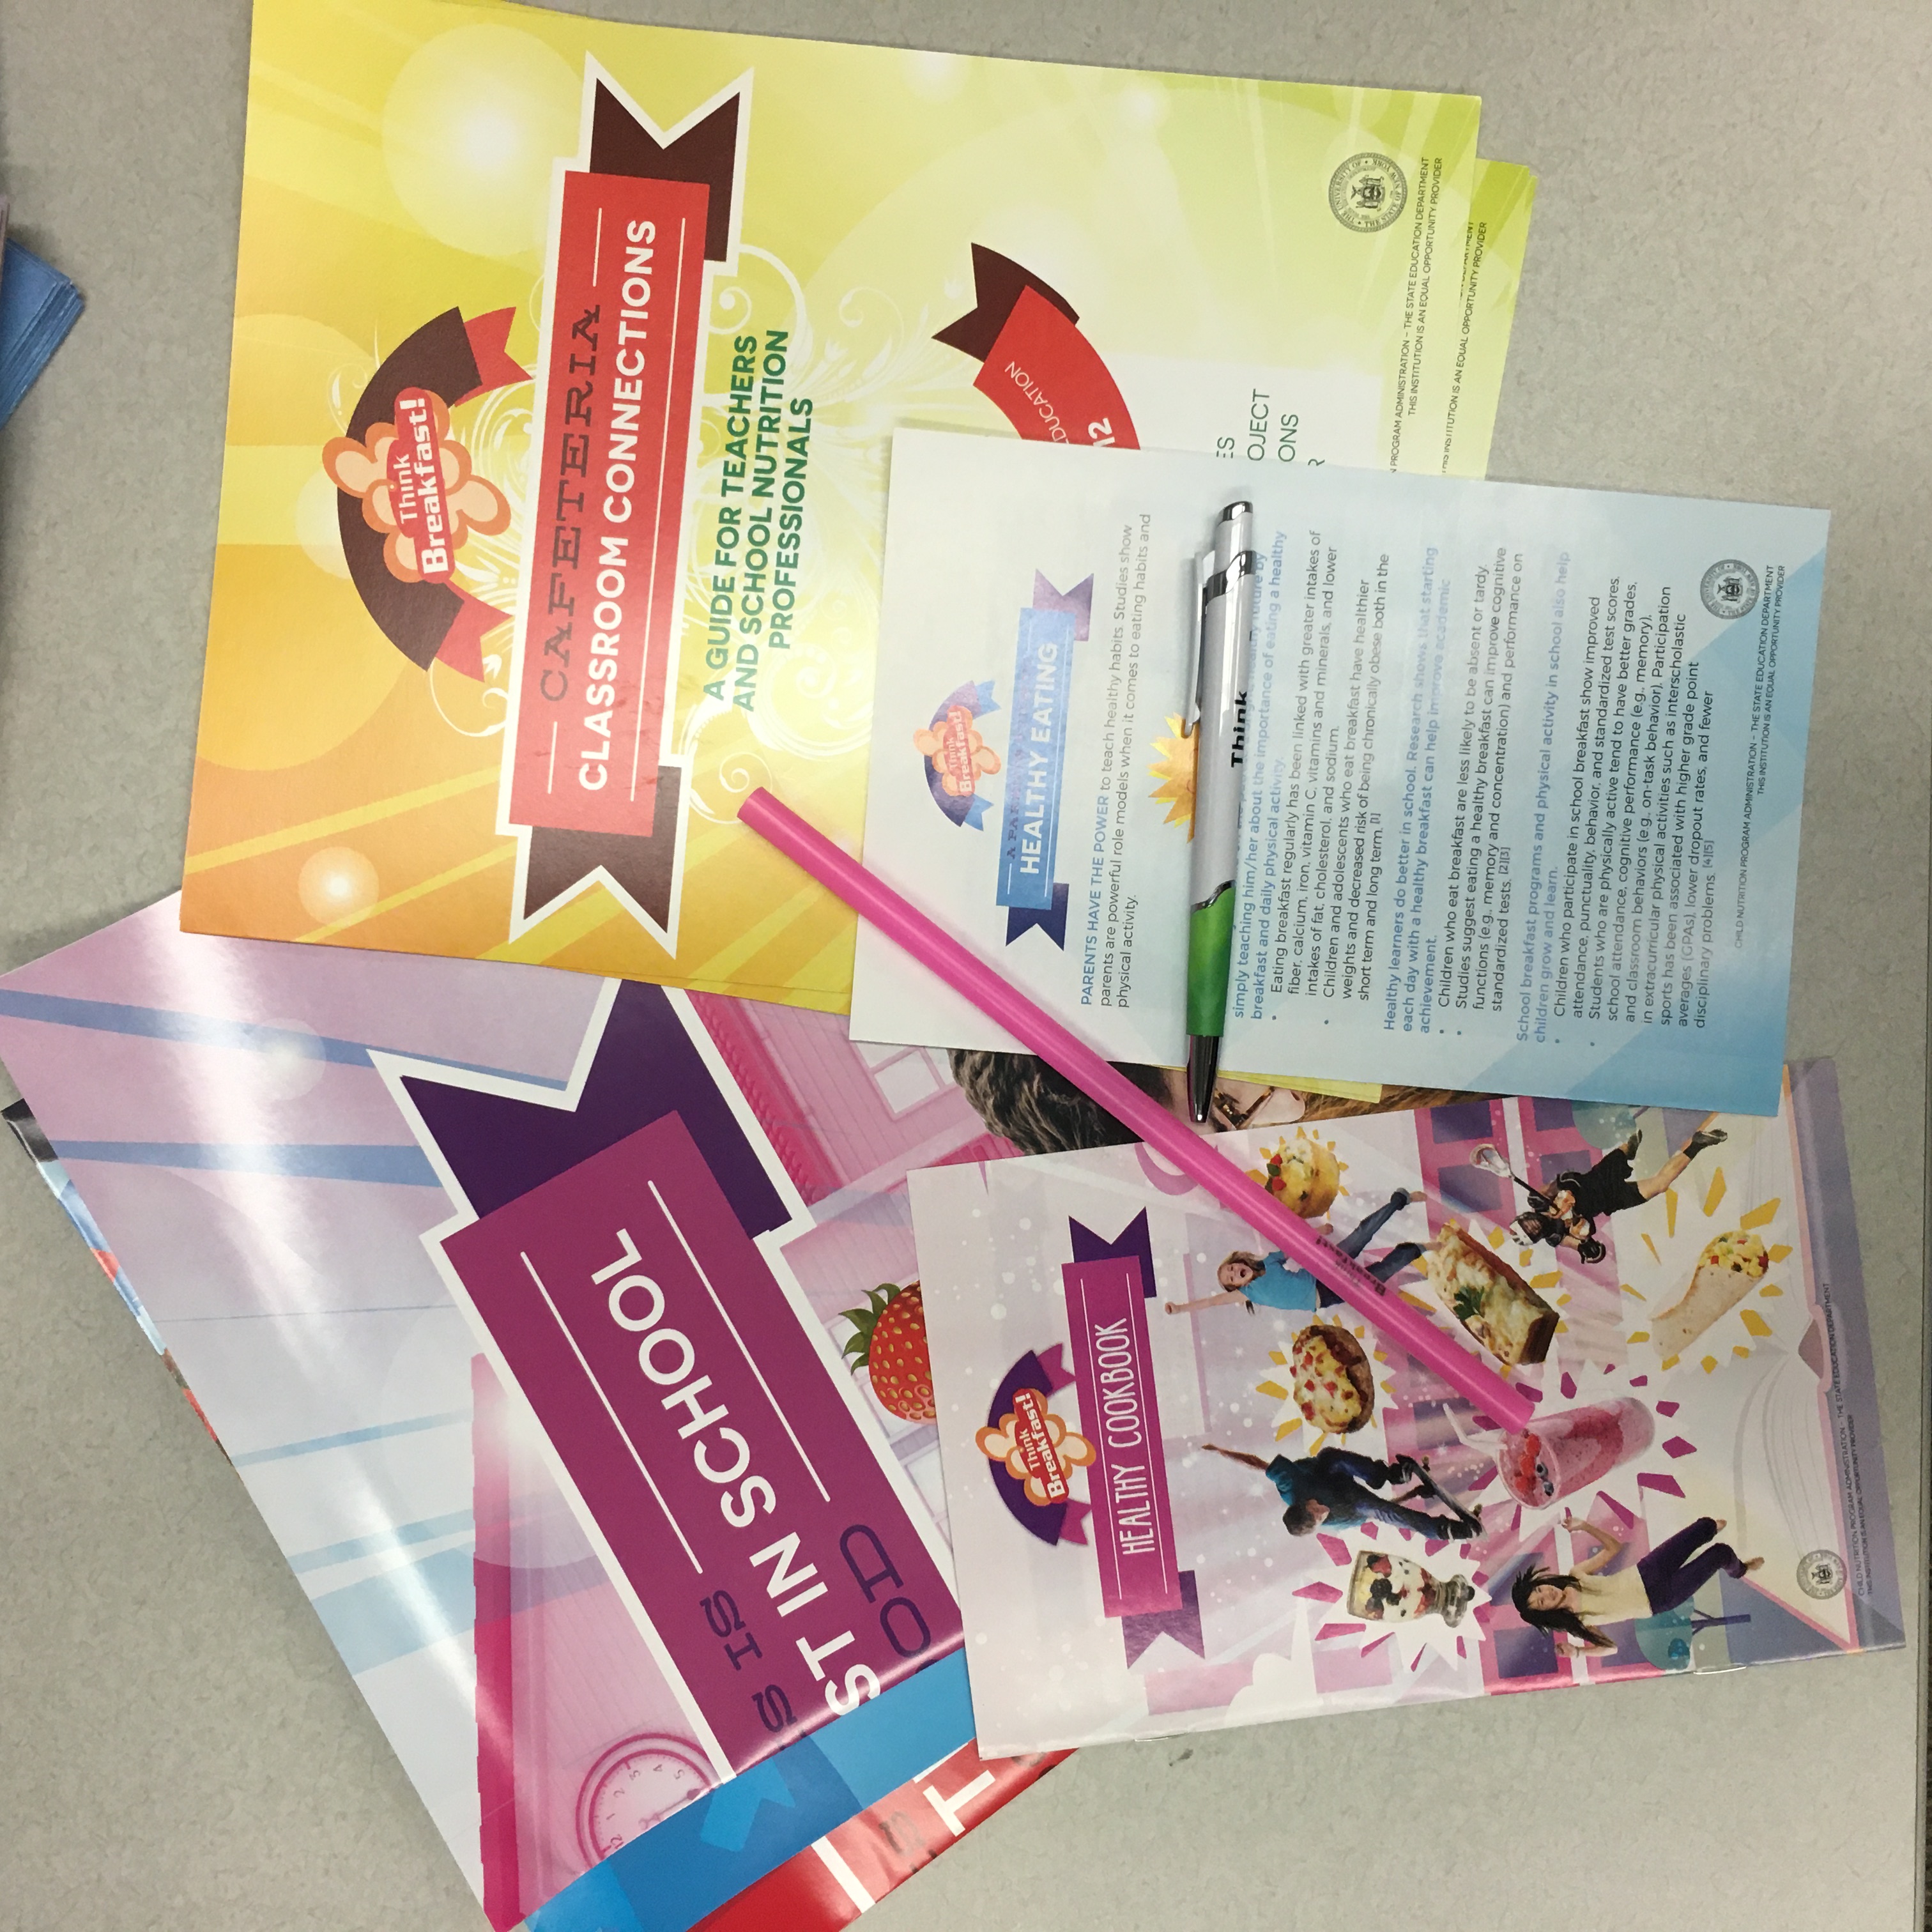 Think Breakfast Kits suitable for Grades 6-12. There is a 3-5 student's guide, a guide to healthy eating, a healthy cookbook, a notebook, a sticker and a straw.